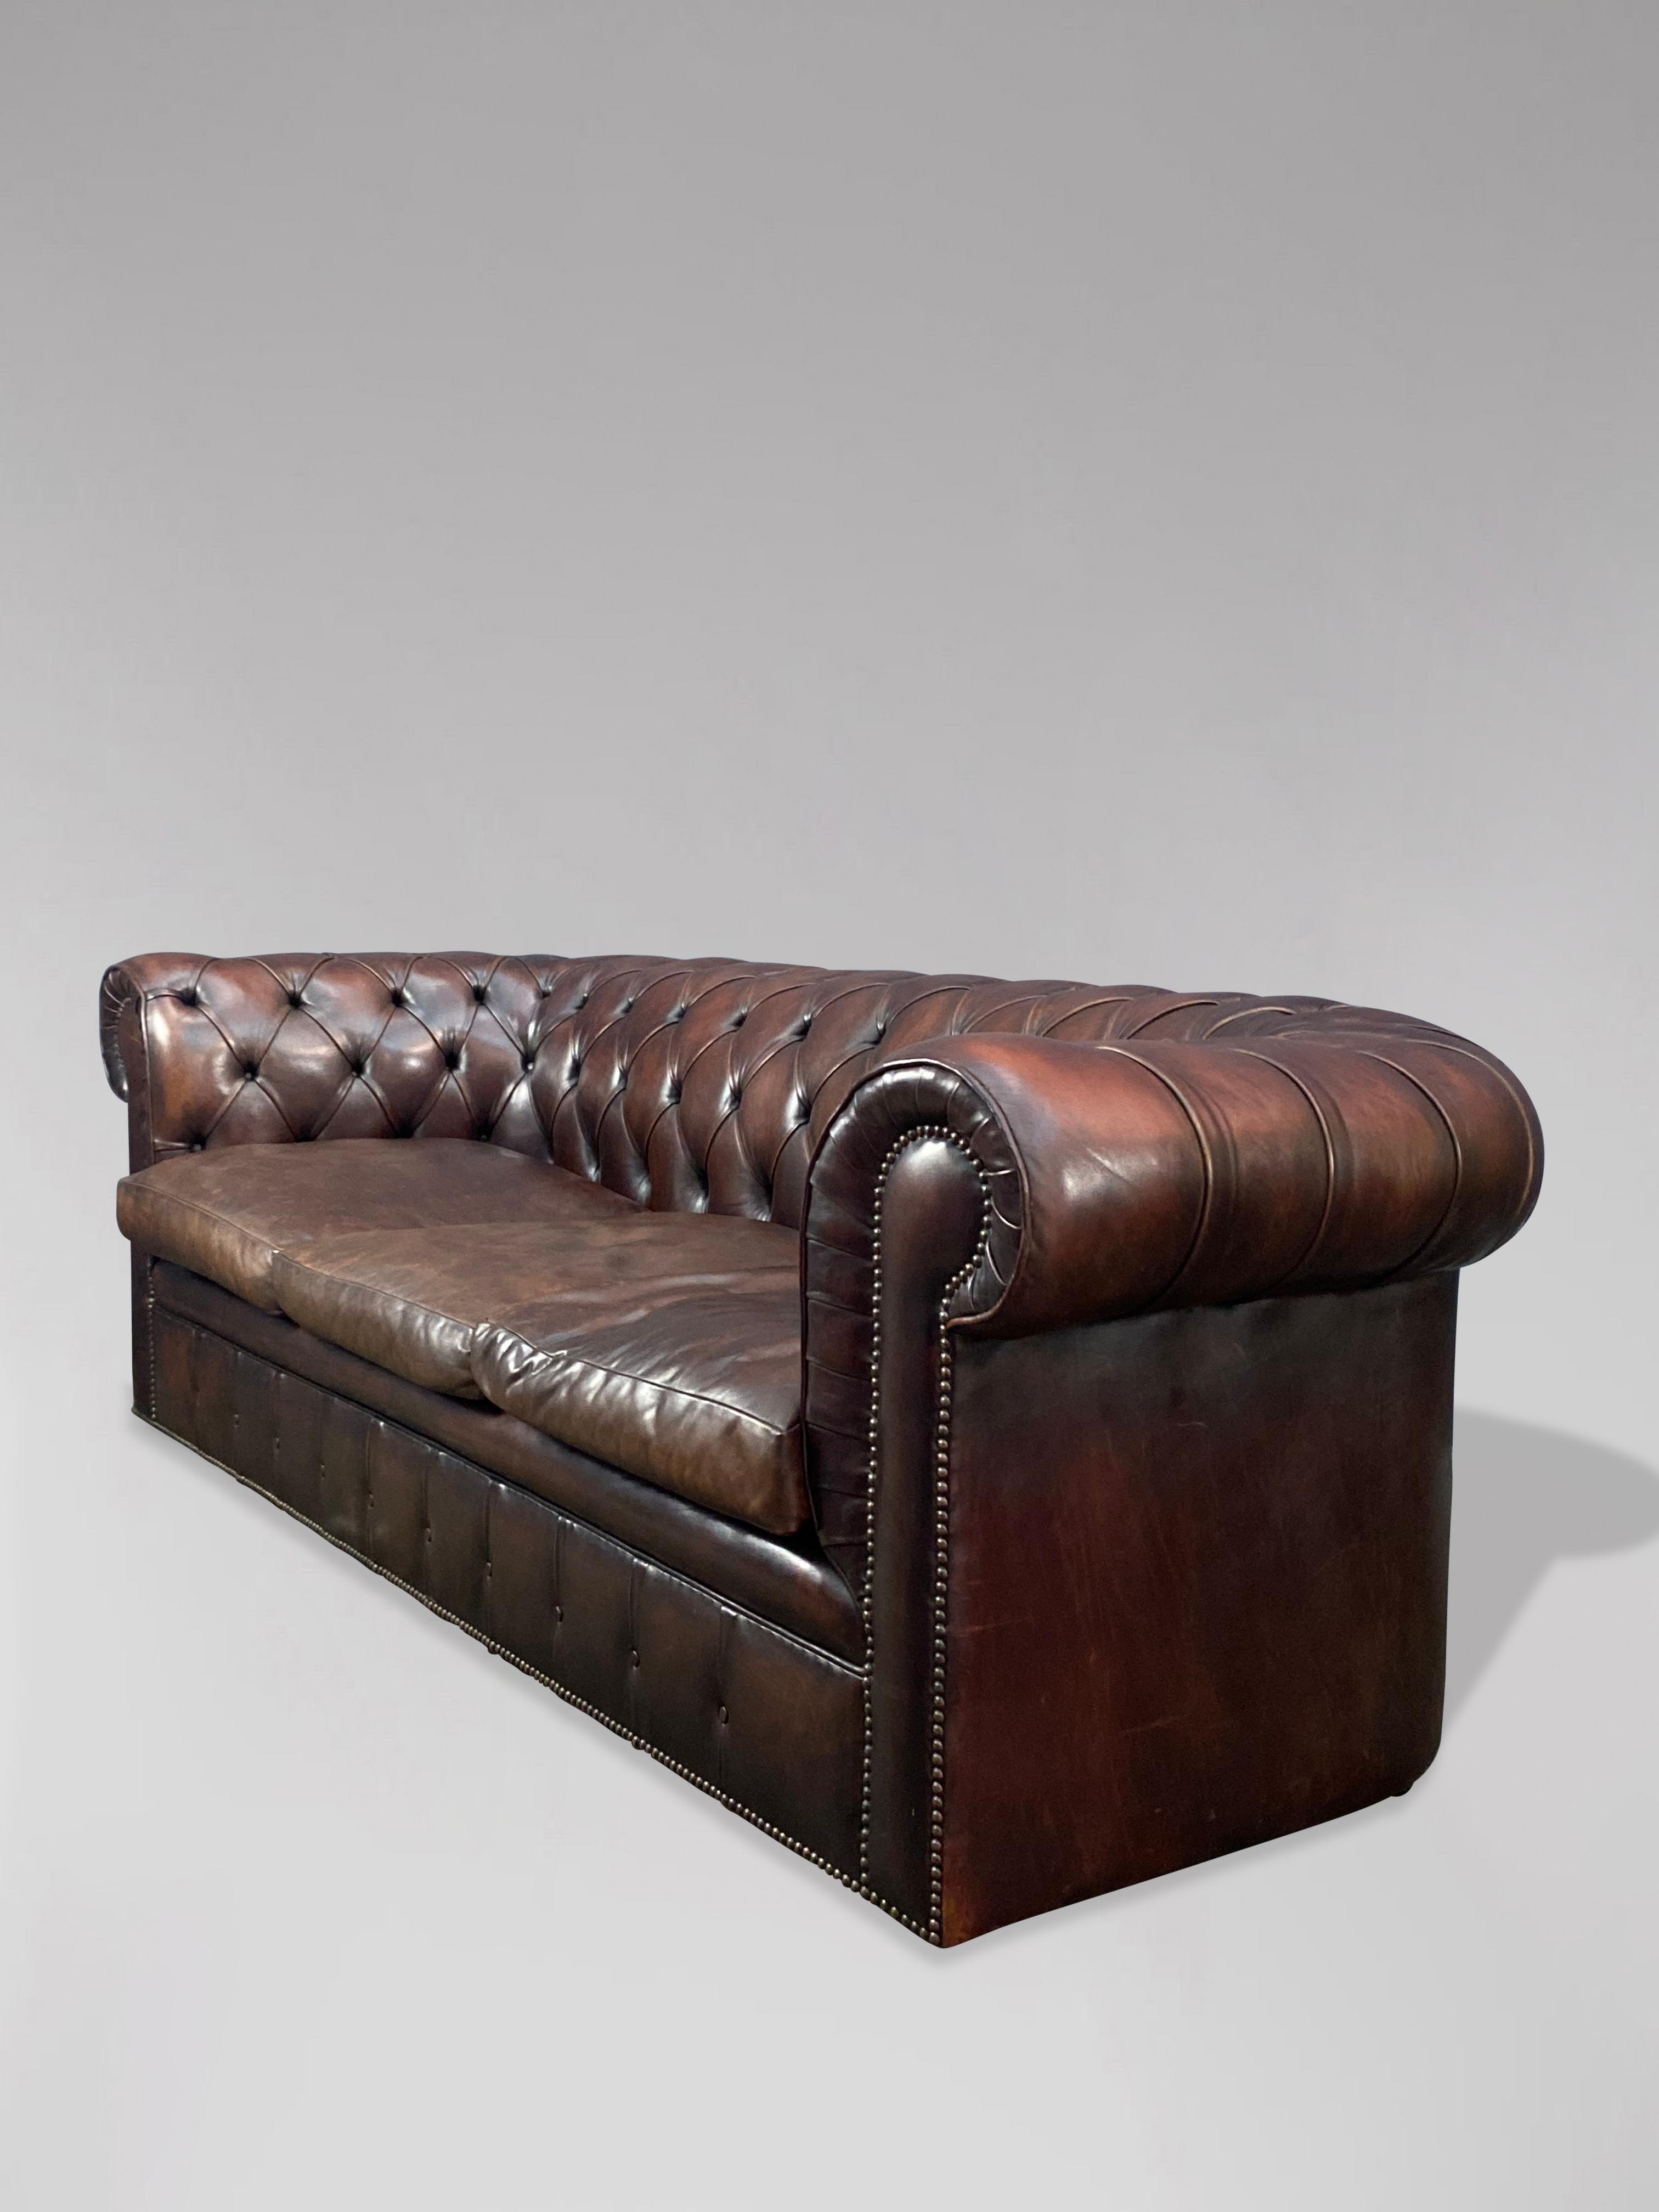 Hand-Crafted 20th Century Brown Leather Three Seater Chesterfield Sofa